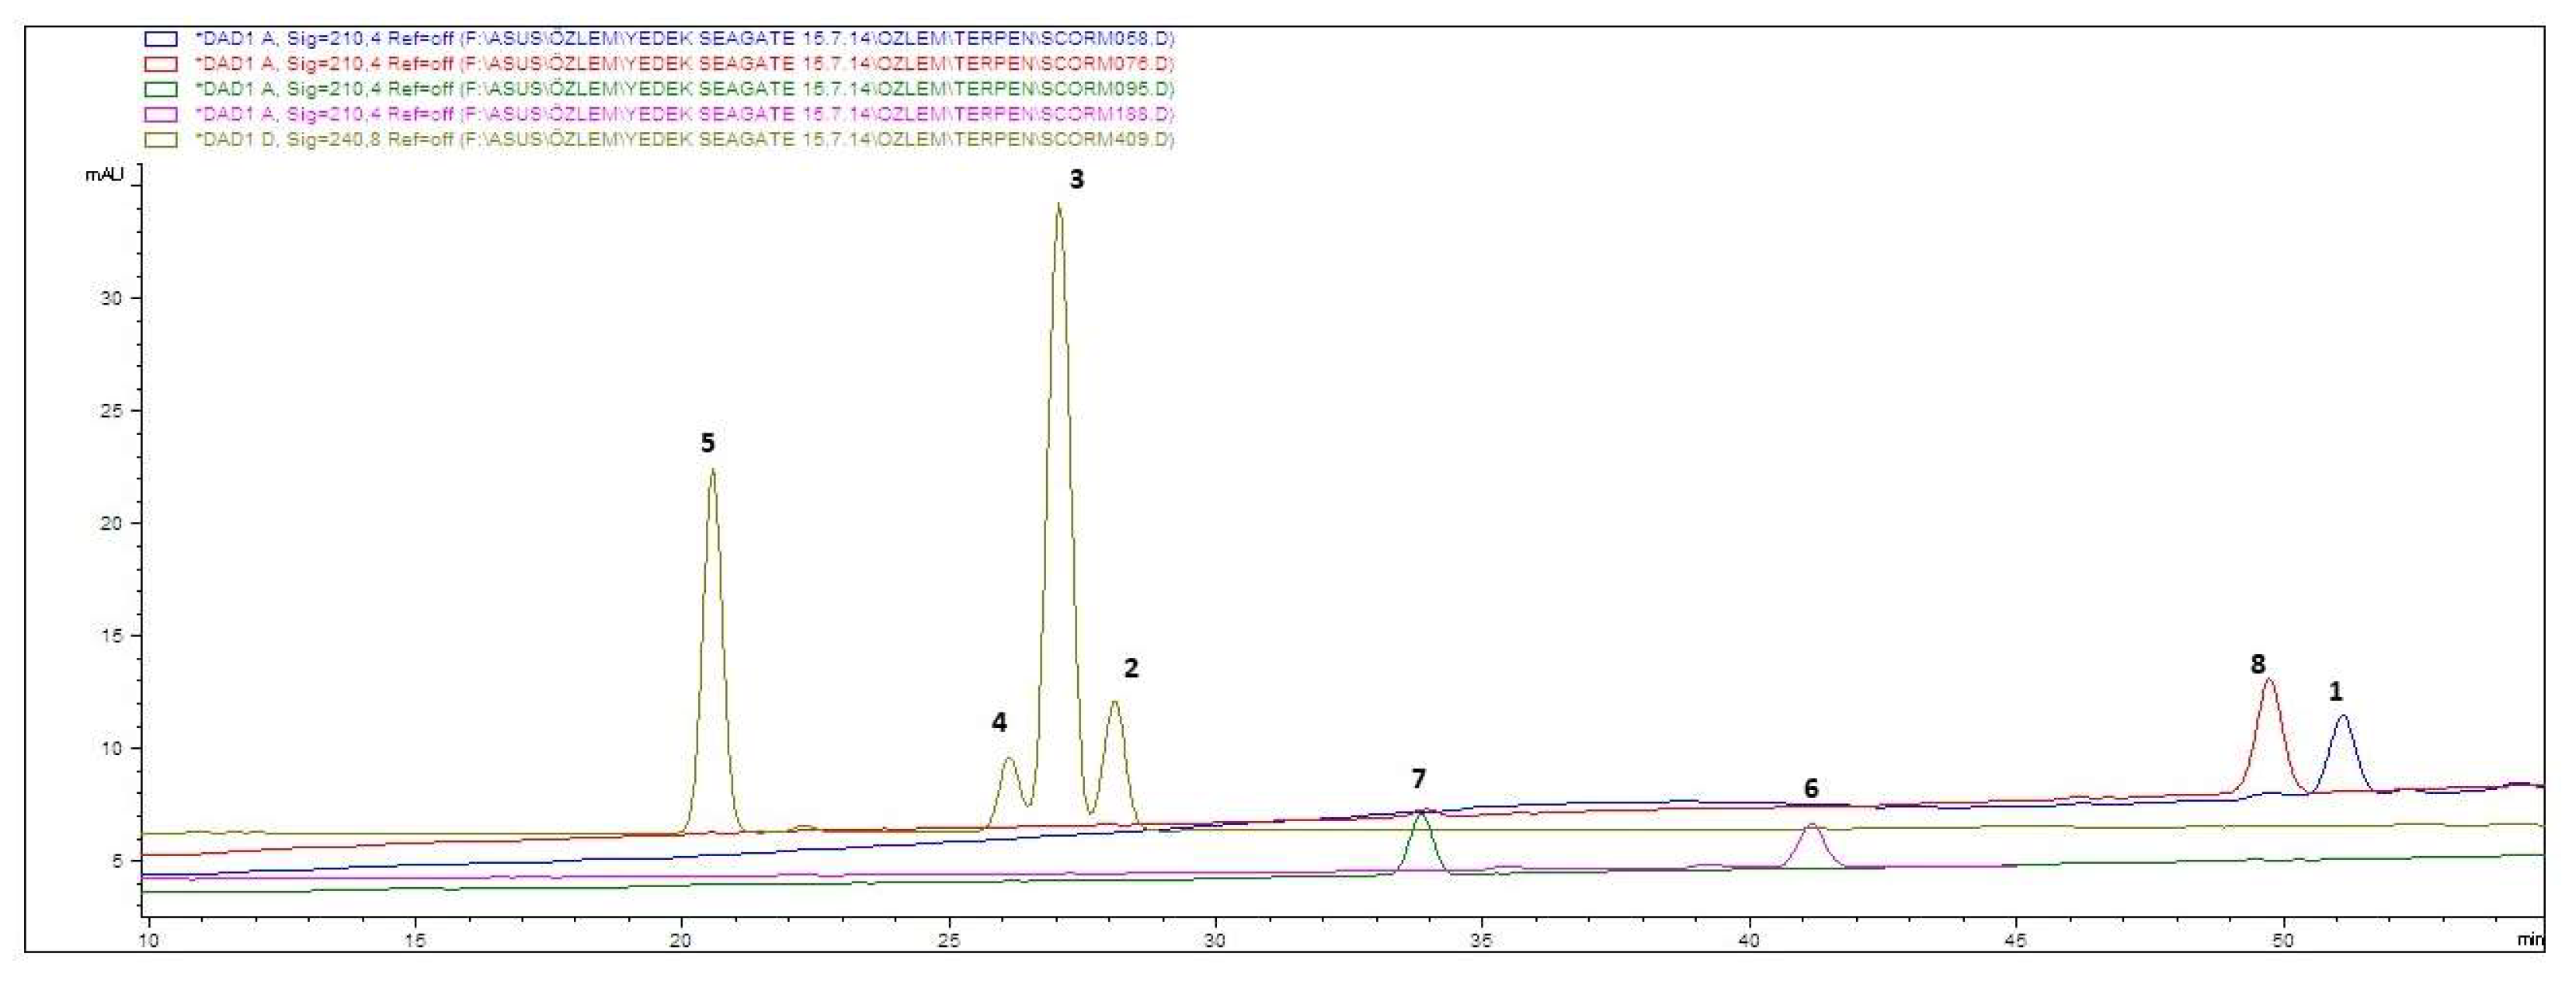 Molecules | Free Full-Text | Phytochemical Analysis of Podospermum and  Scorzonera n-Hexane Extracts and the HPLC Quantitation of Triterpenes | HTML